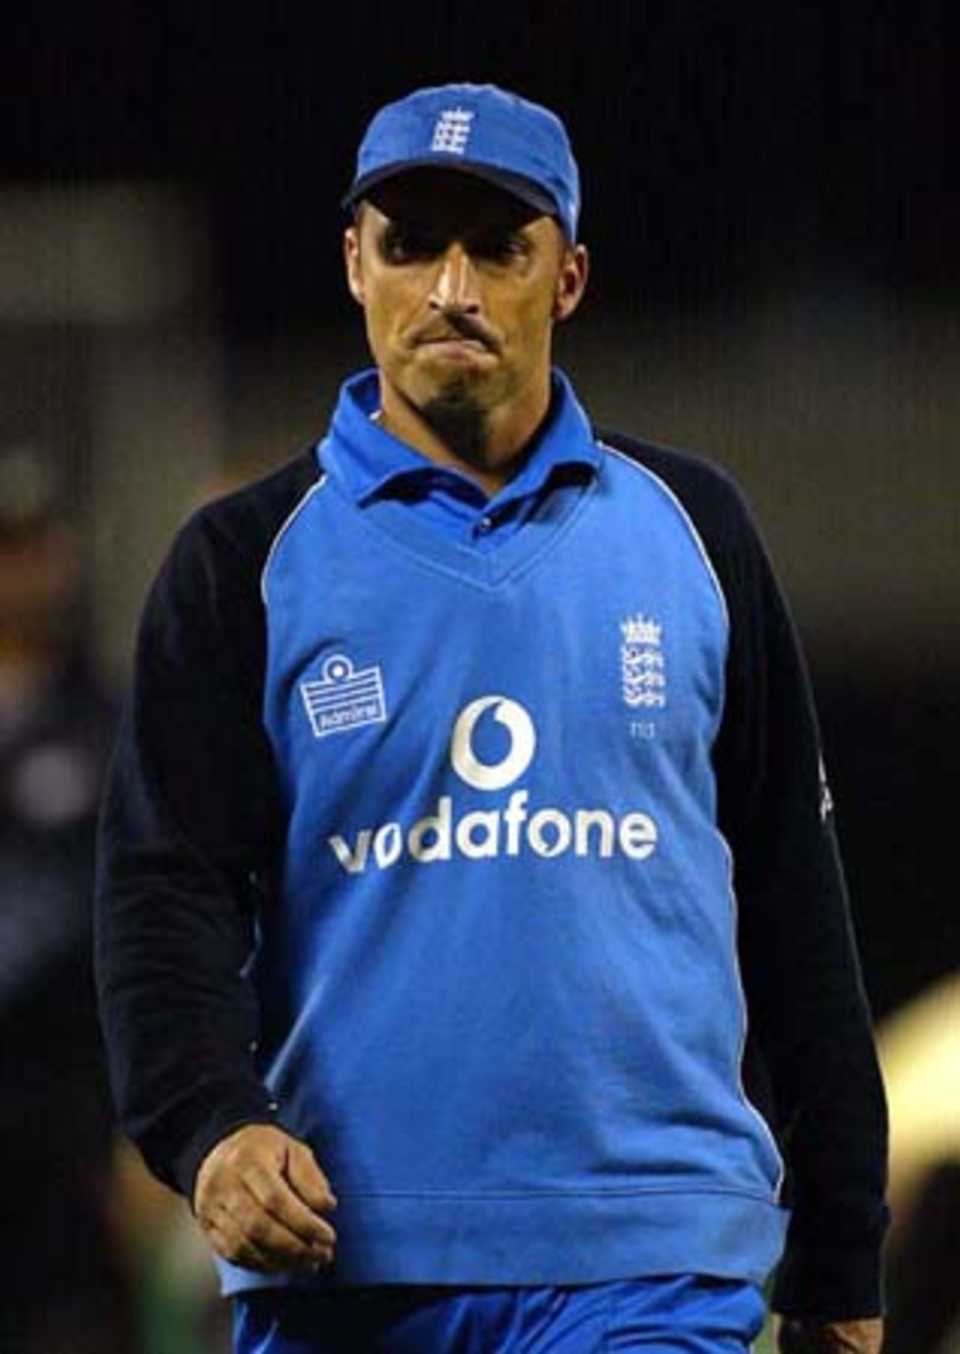 Disappointed Hussain walks from the field after England lose. 1st ODI: New Zealand v England at Christchurch, 13 Feb 2002